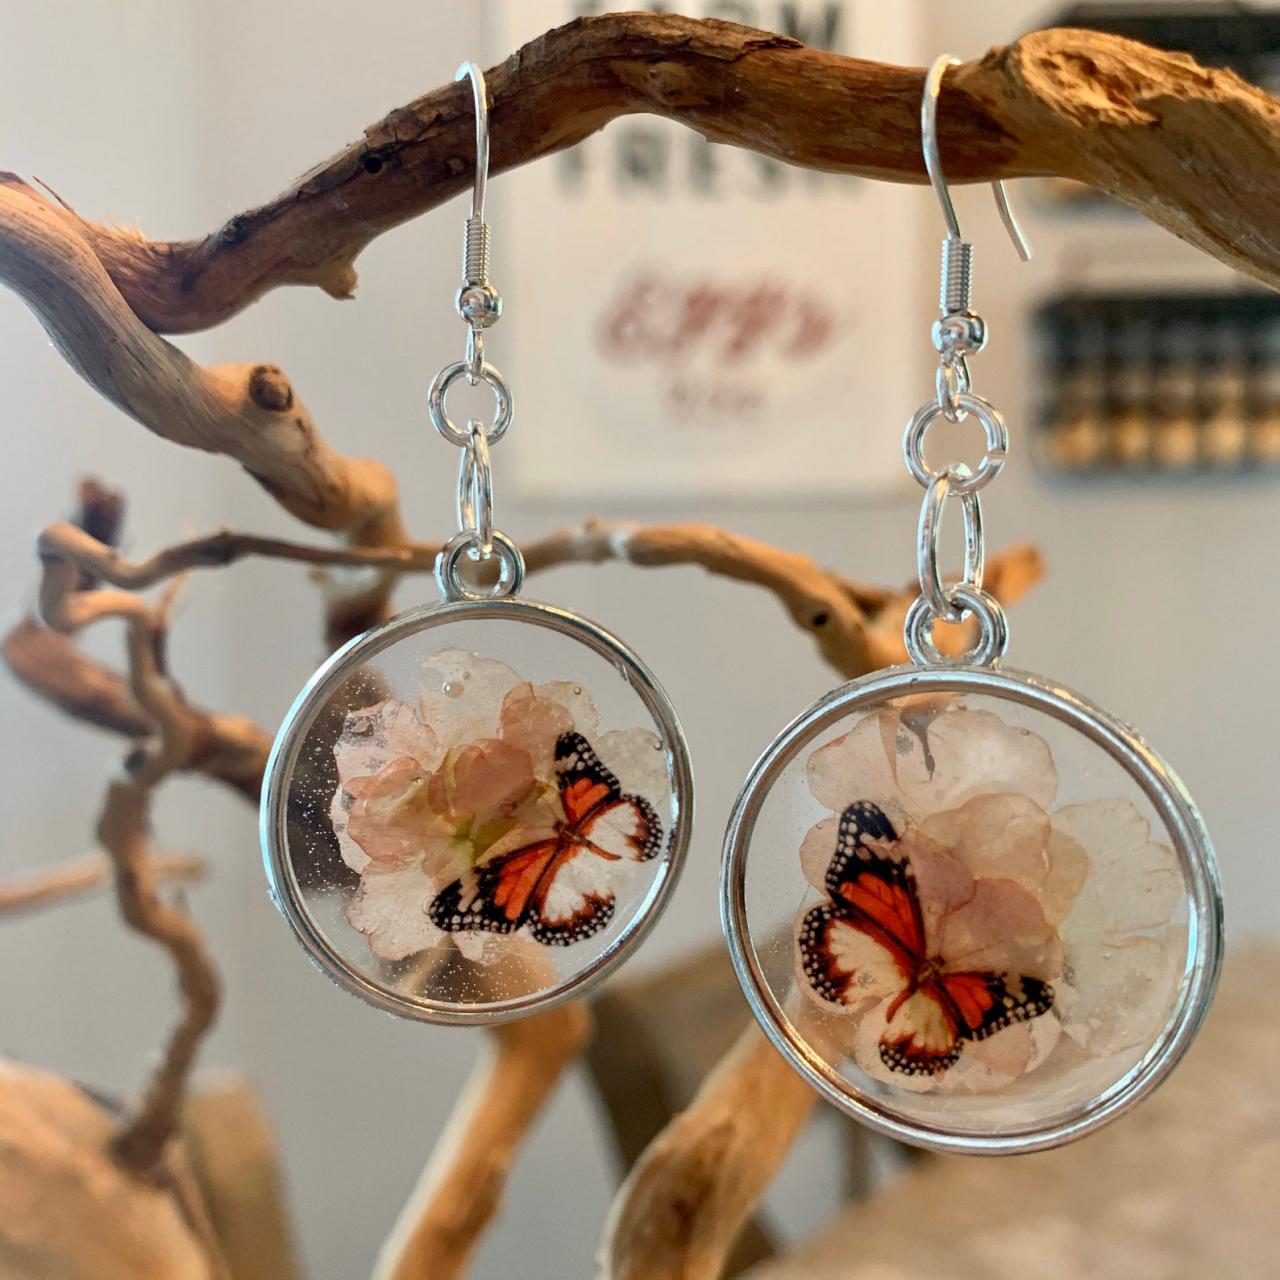 Resin Pressed Flowers Earrings, Real Flower Earrings, Resin Flower Jewelry, Unique Gift For Grad,preserved Flowers, Minimalist Jewelry Gifts,